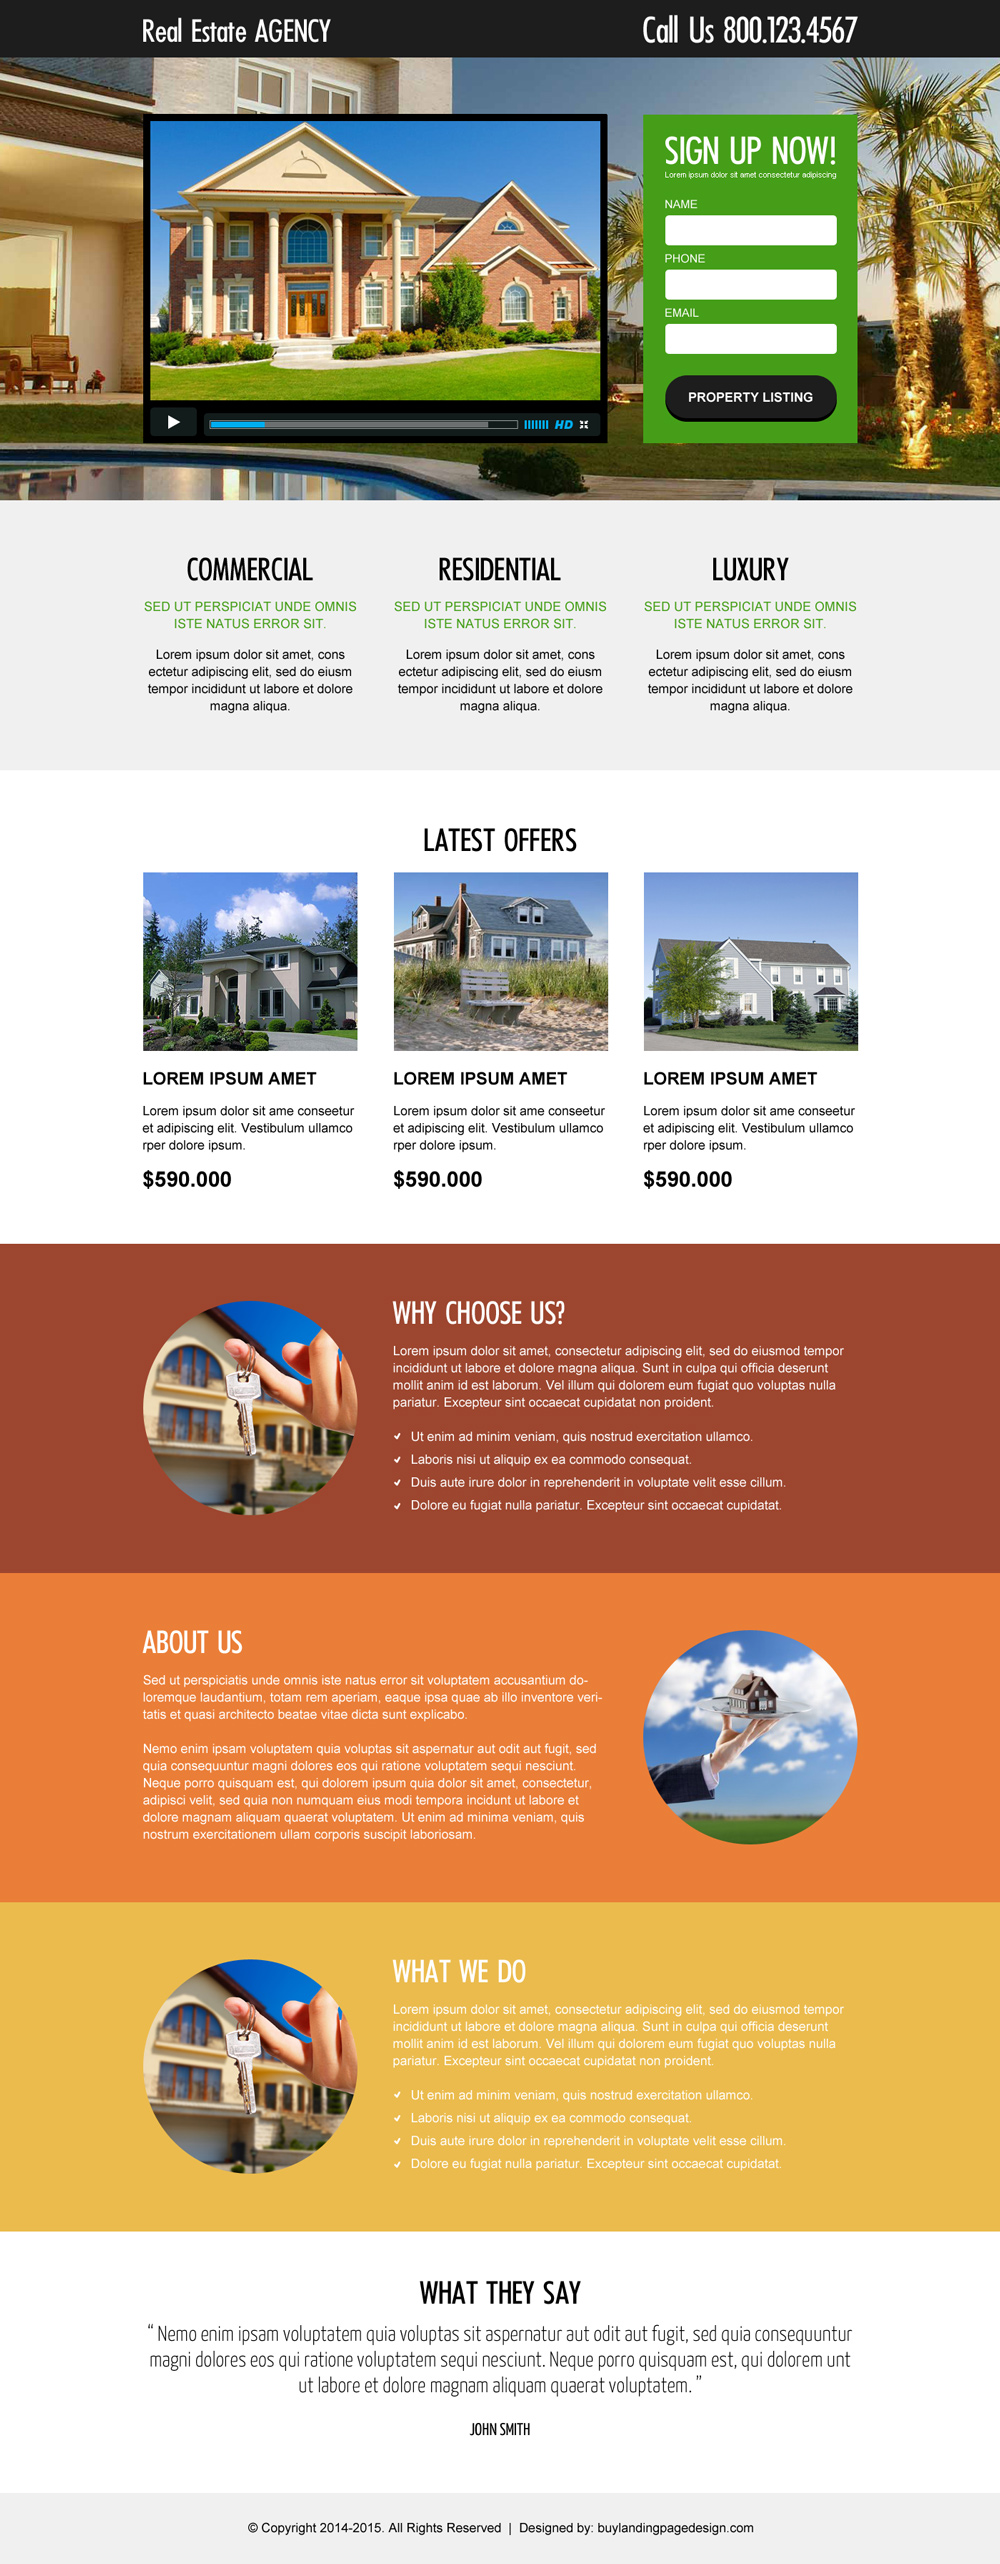 real-estate-lead-capture-converting-video-landing-page-design-template-009